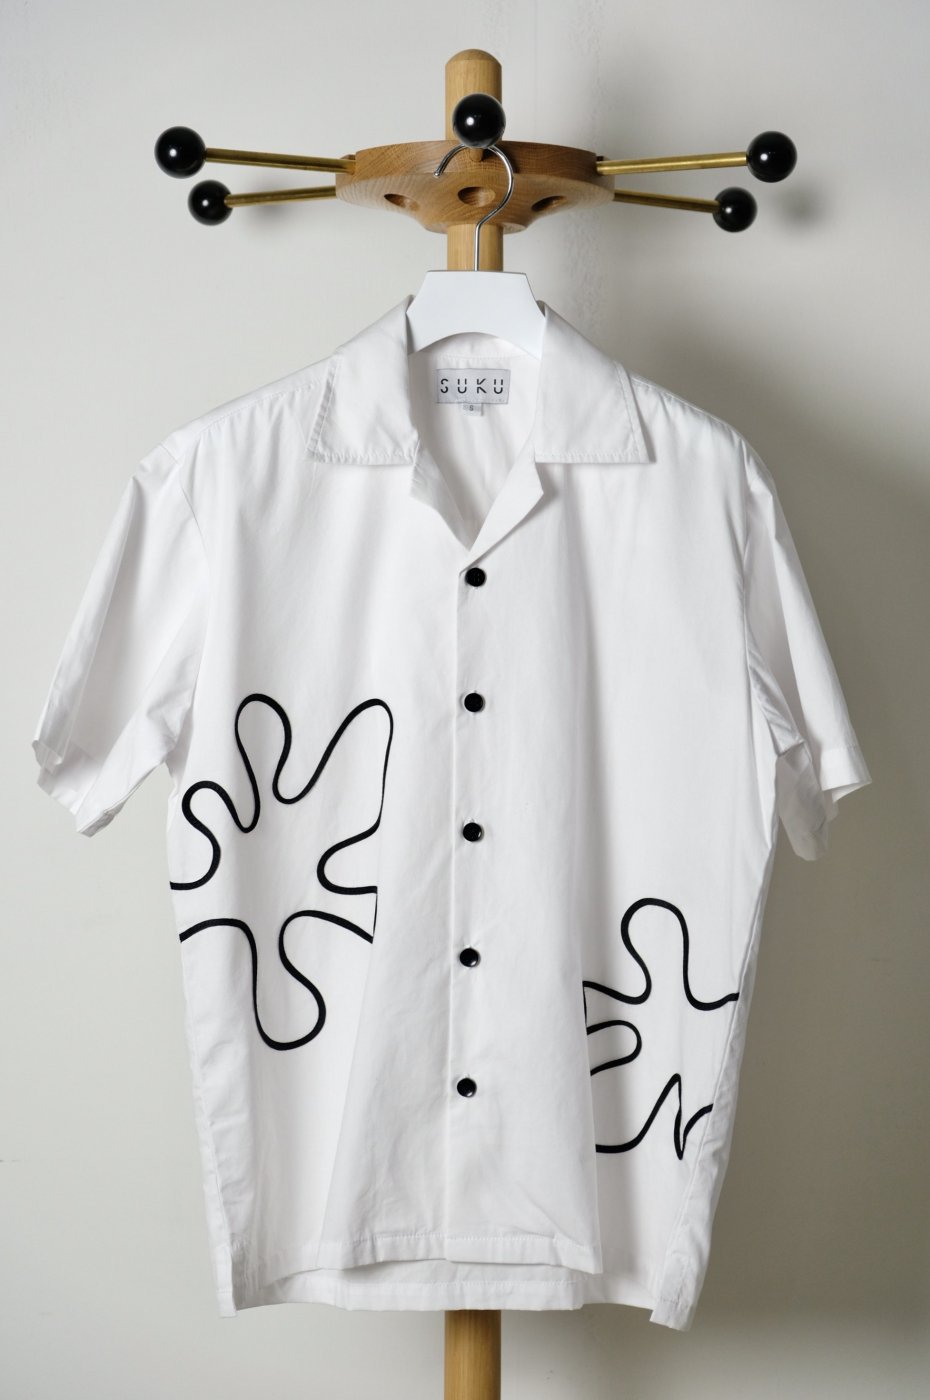 SUKU HOME スクホーム-ROMANCE SHIRT / WHITE WITH BLACK EMBROIDERY-